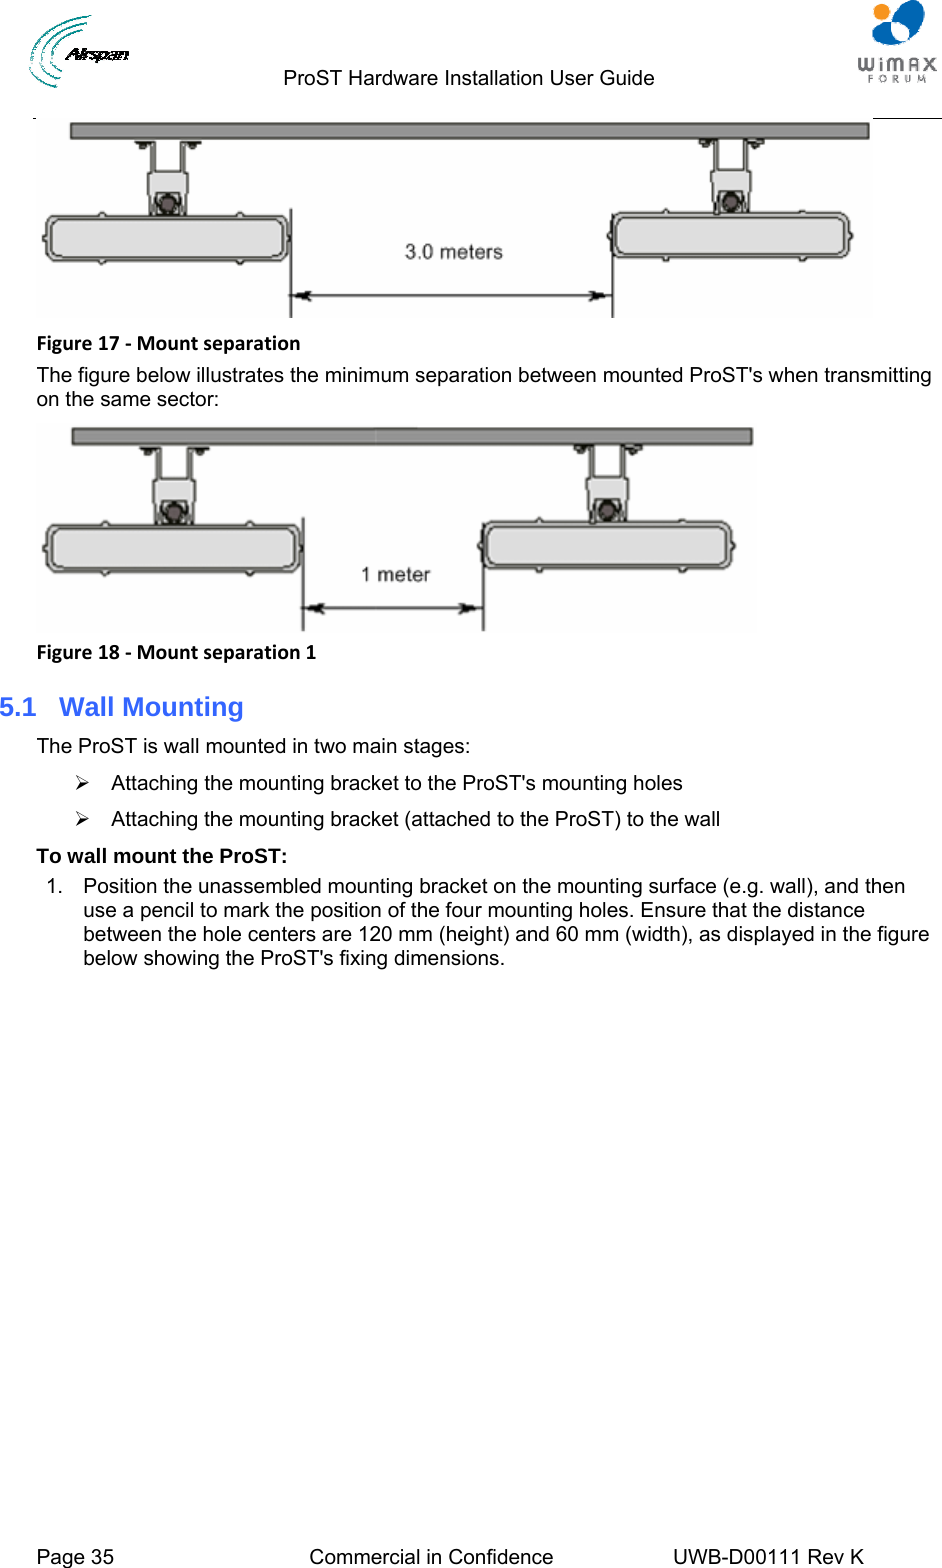                                  ProST Hardware Installation User Guide  Page 35  Commercial in Confidence  UWB-D00111 Rev K    Figure17‐MountseparationThe figure below illustrates the minimum separation between mounted ProST&apos;s when transmitting on the same sector:  Figure18‐Mountseparation15.1  Wall Mounting The ProST is wall mounted in two main stages: ¾  Attaching the mounting bracket to the ProST&apos;s mounting holes ¾  Attaching the mounting bracket (attached to the ProST) to the wall To wall mount the ProST: 1.  Position the unassembled mounting bracket on the mounting surface (e.g. wall), and then use a pencil to mark the position of the four mounting holes. Ensure that the distance between the hole centers are 120 mm (height) and 60 mm (width), as displayed in the figure below showing the ProST&apos;s fixing dimensions. 